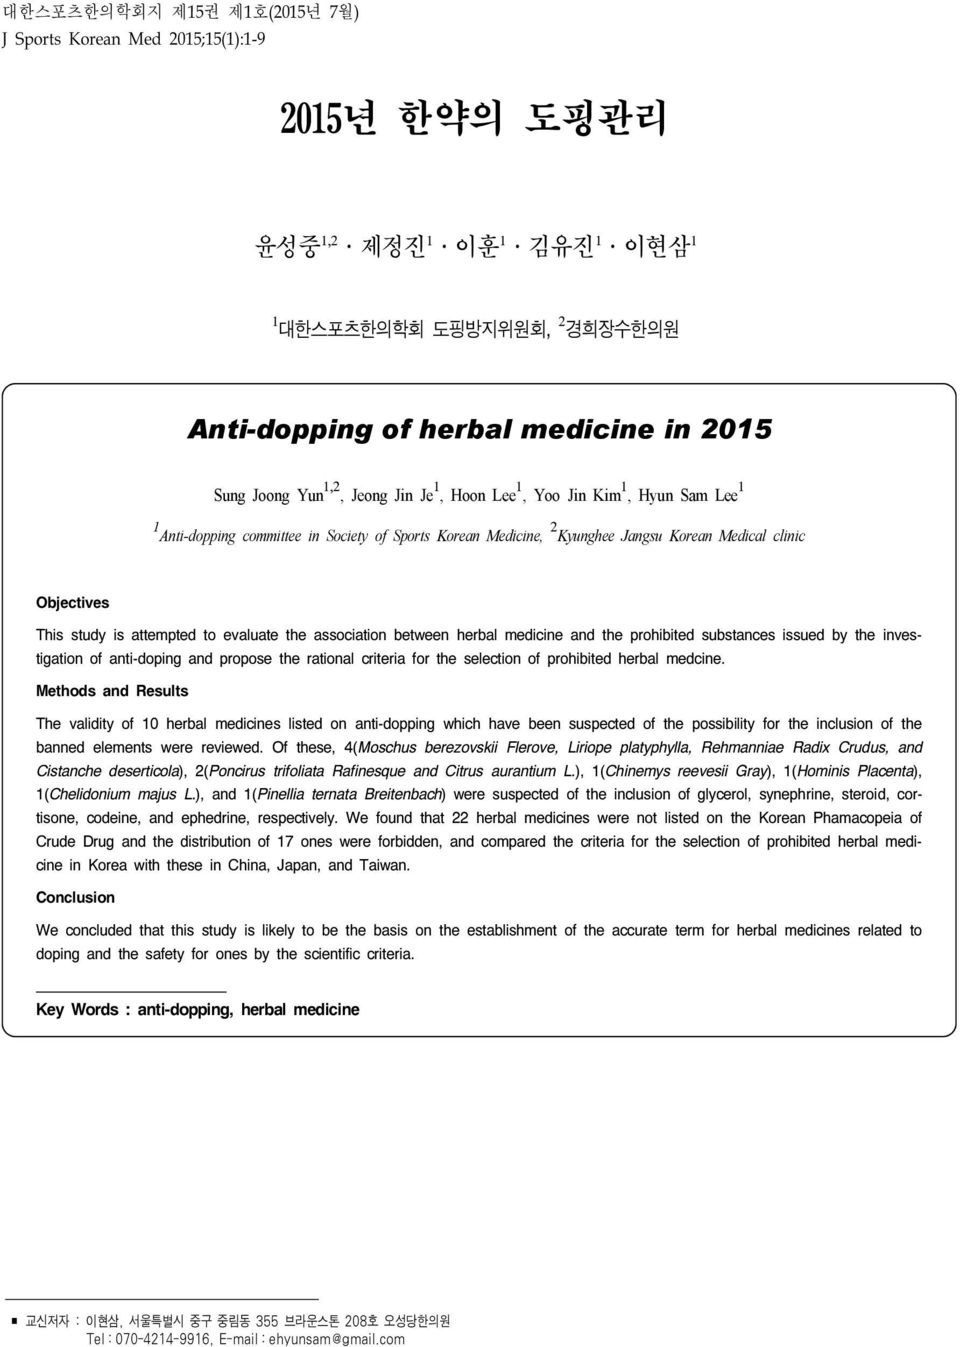 attempted to evaluate the association between herbal medicine and the prohibited substances issued by the investigation of anti-doping and propose the rational criteria for the selection of